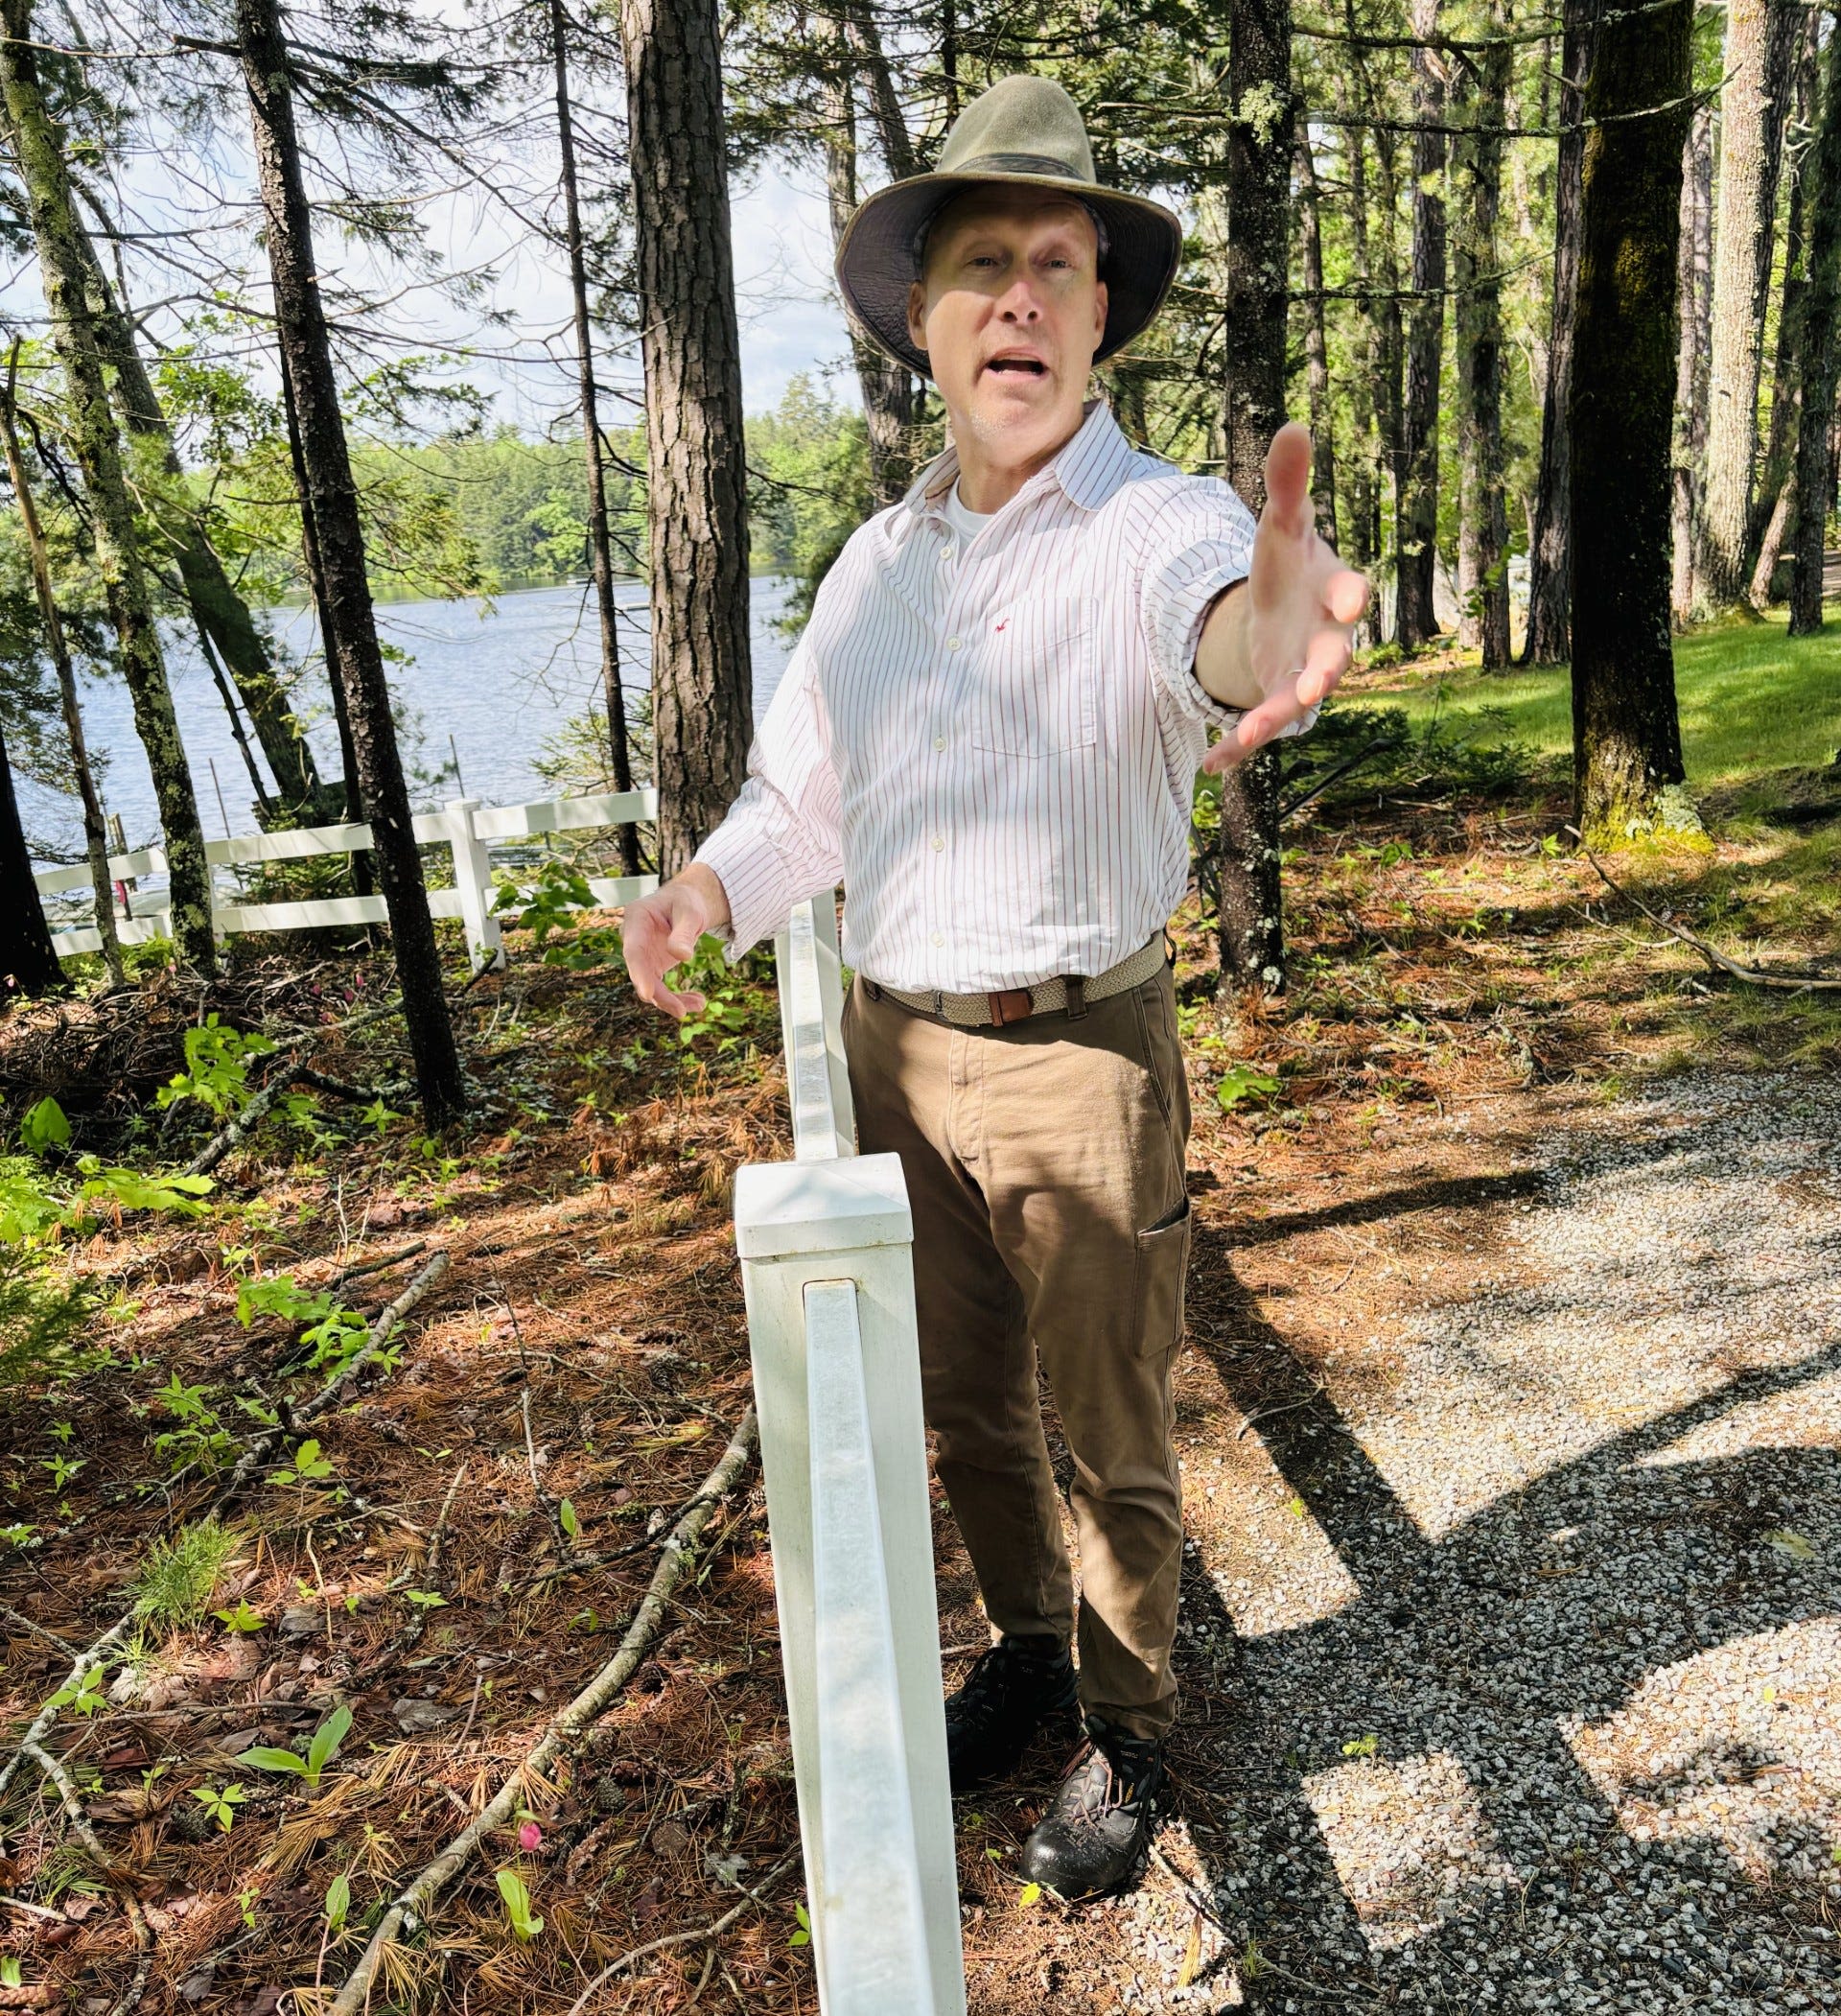 Maine couple's 'glampground' dream at Sand Pond faces opposition from city, neighbors